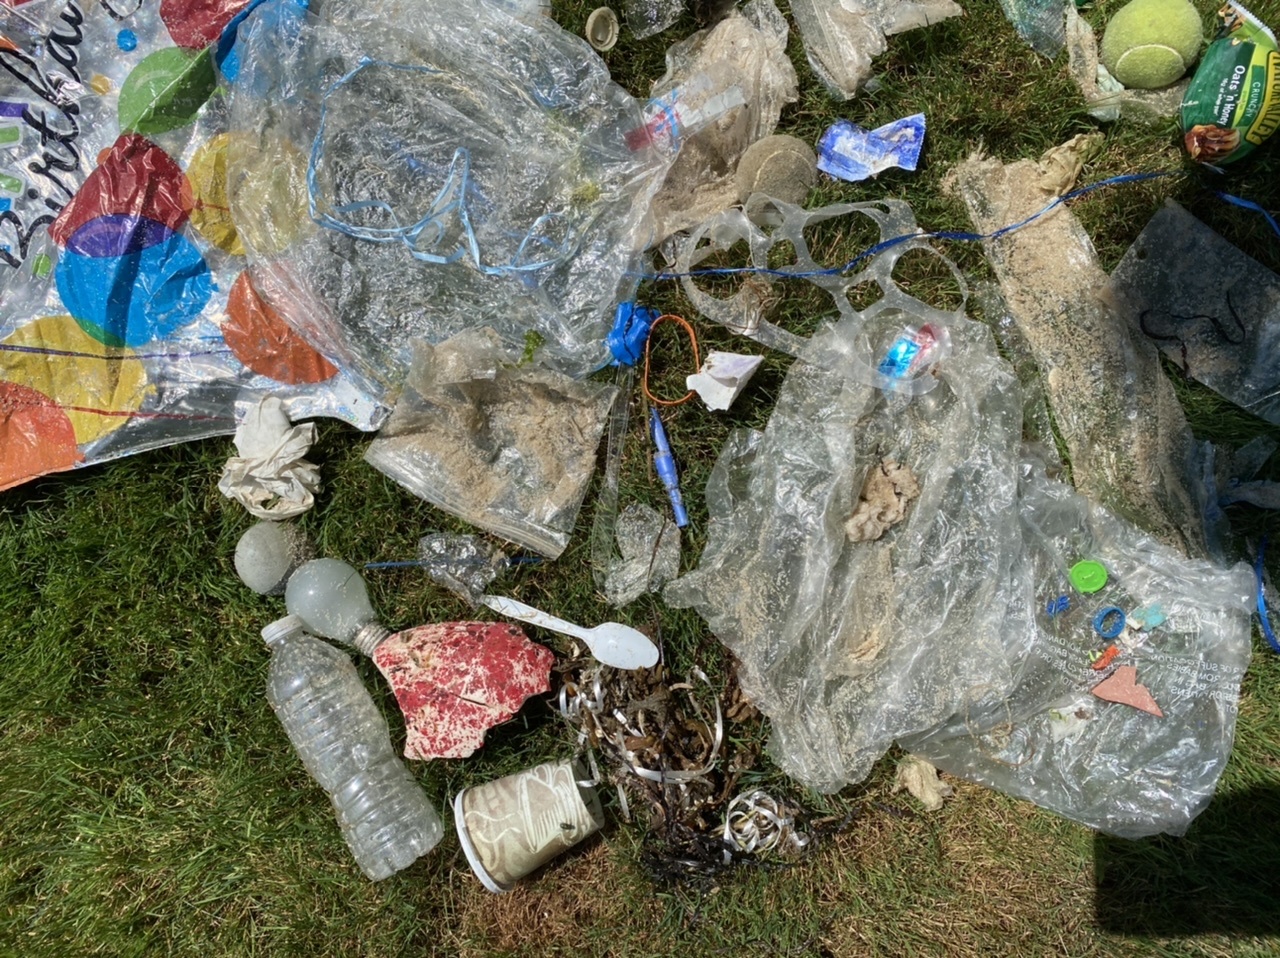 Mandy Volpe submitted this photo of trash collected on a beach walk between Cryder and Cooper Beach on Friday.